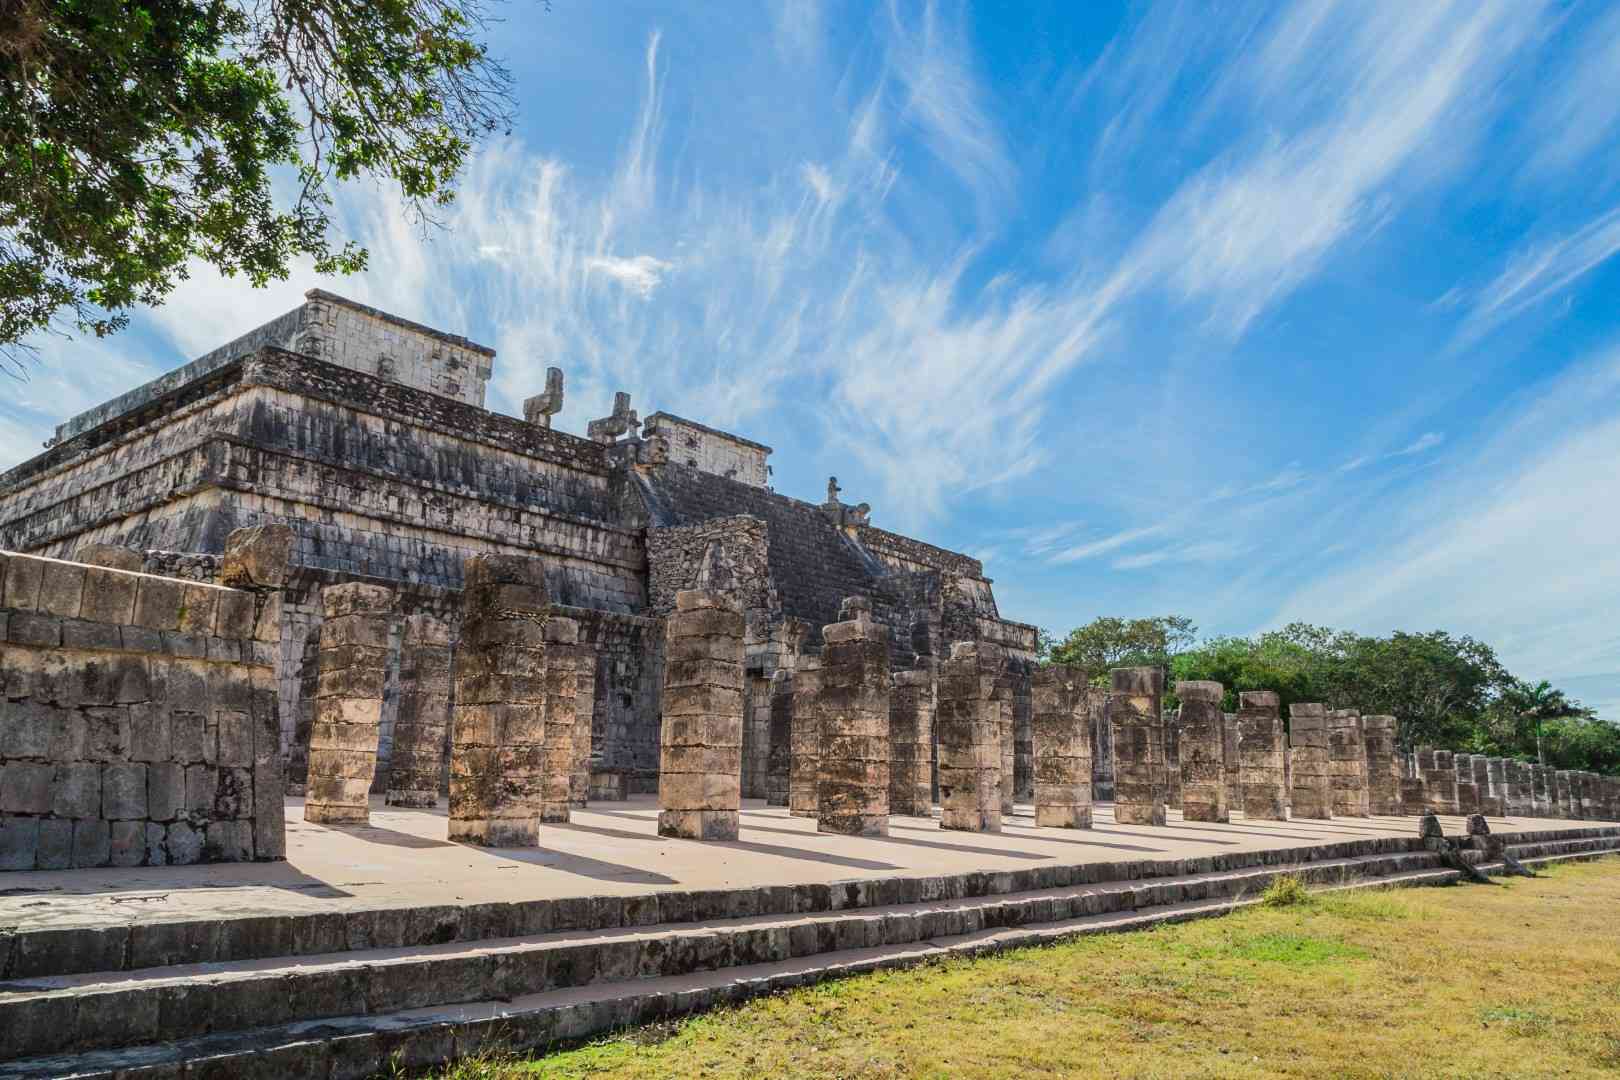 When is the Best Time to visit Chichen Itza?